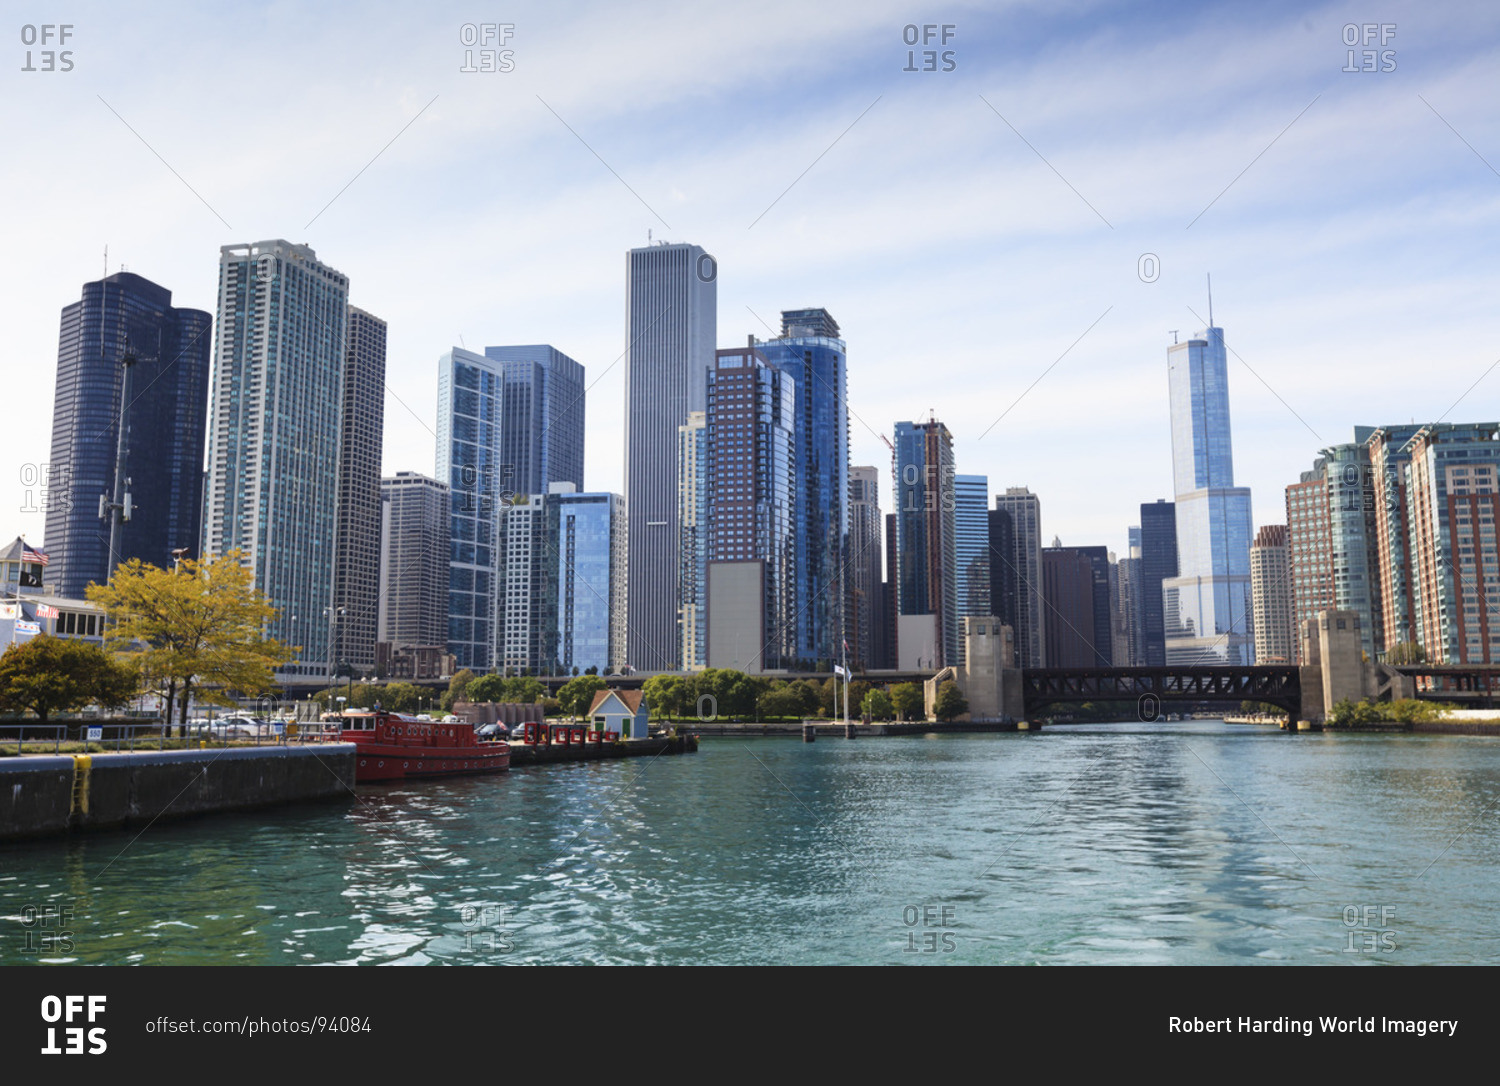 City skyline from the Chicago River, Chicago, Illinois, United States of America, North America